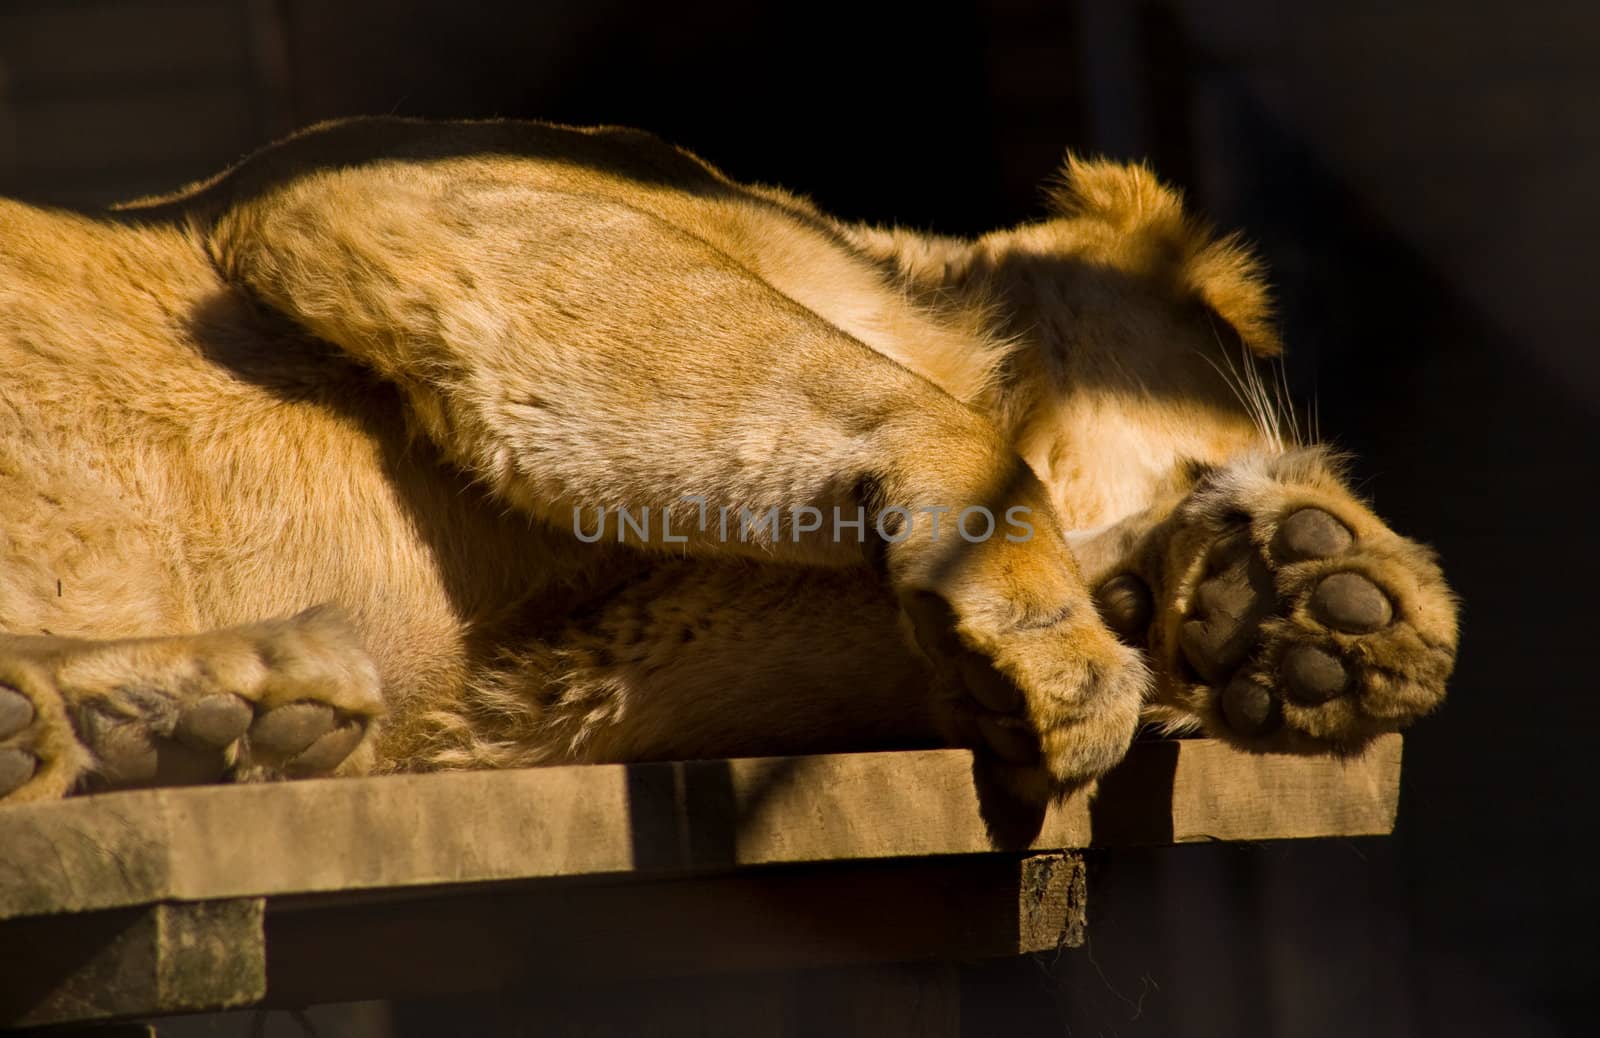 Lioness resting on wooden bench, showing her feet